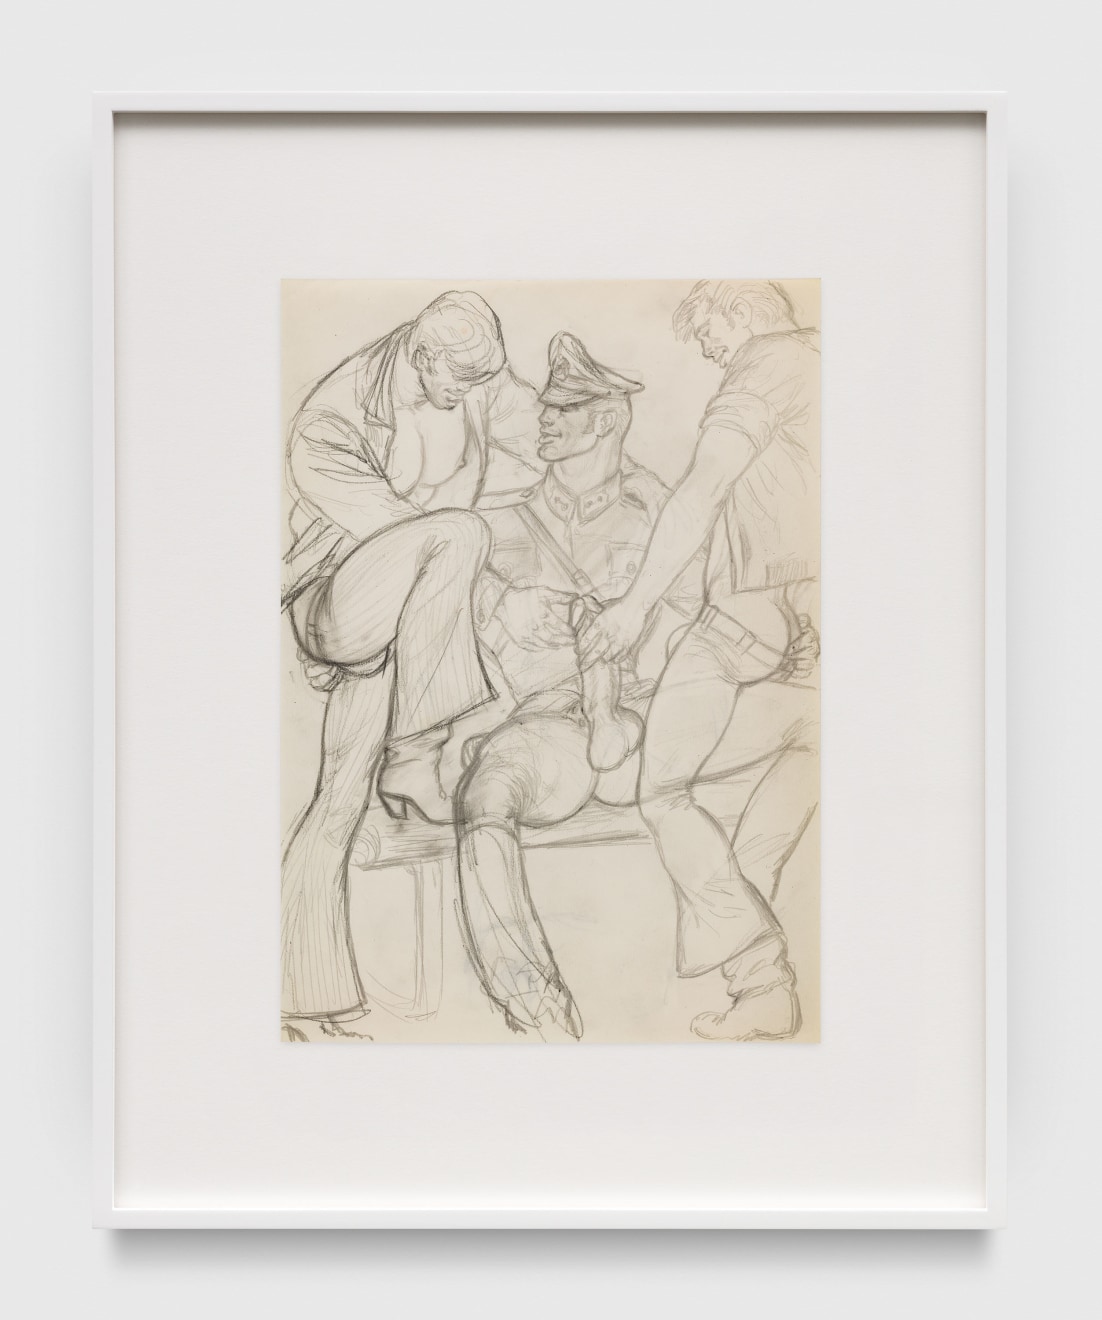 Tom of Finland, Untitled (Preparatory Drawing), 1969